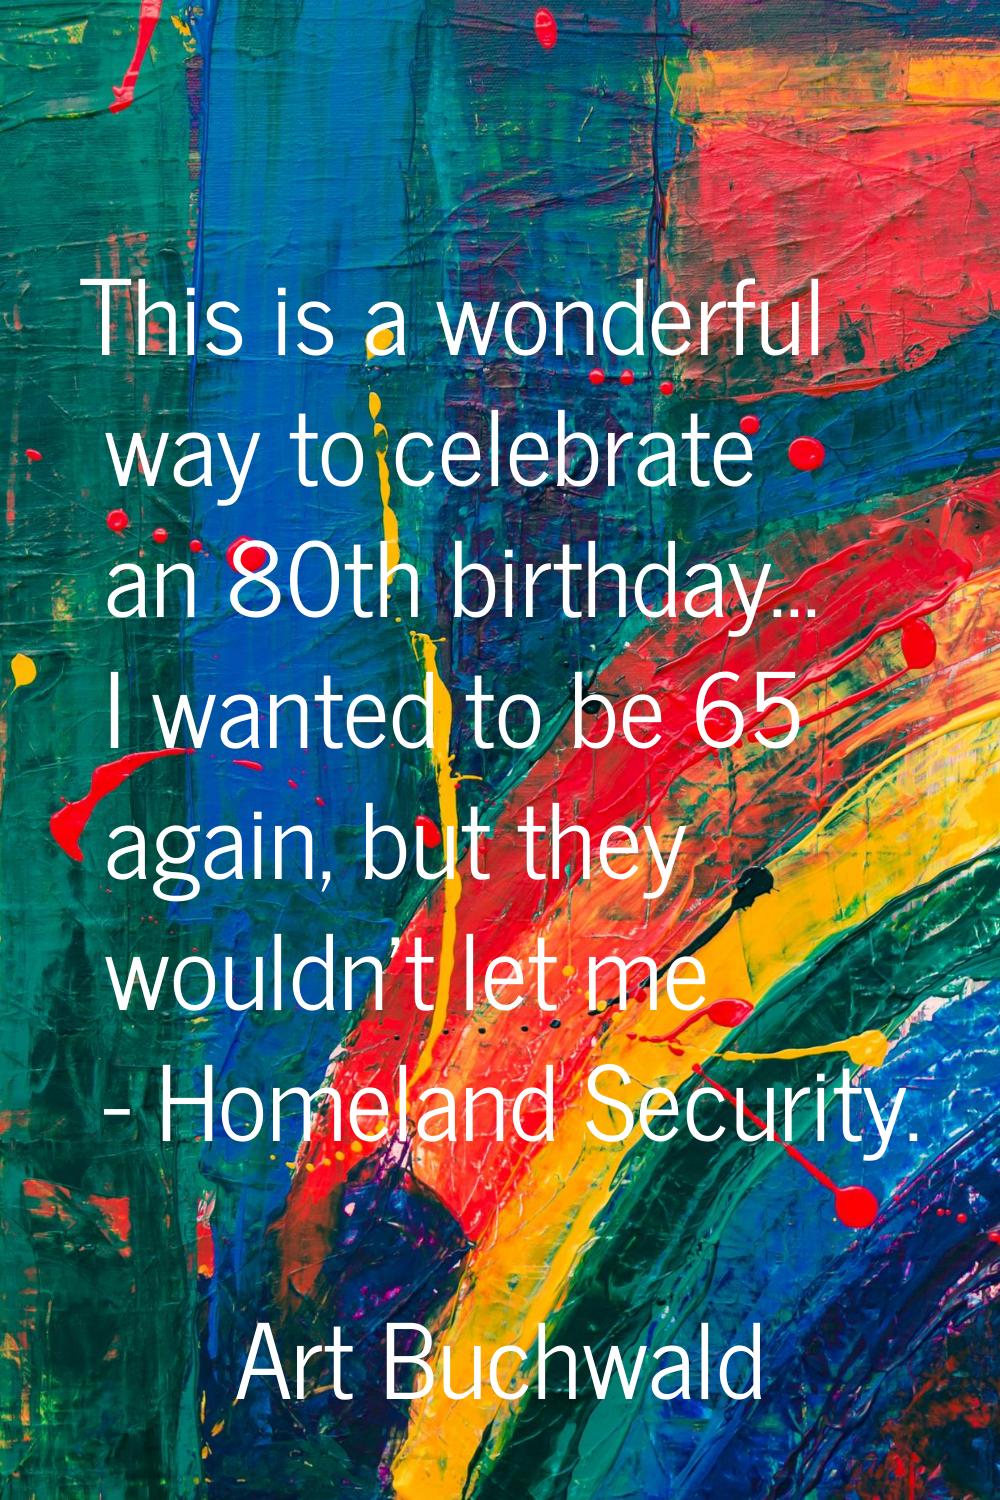 This is a wonderful way to celebrate an 80th birthday... I wanted to be 65 again, but they wouldn't